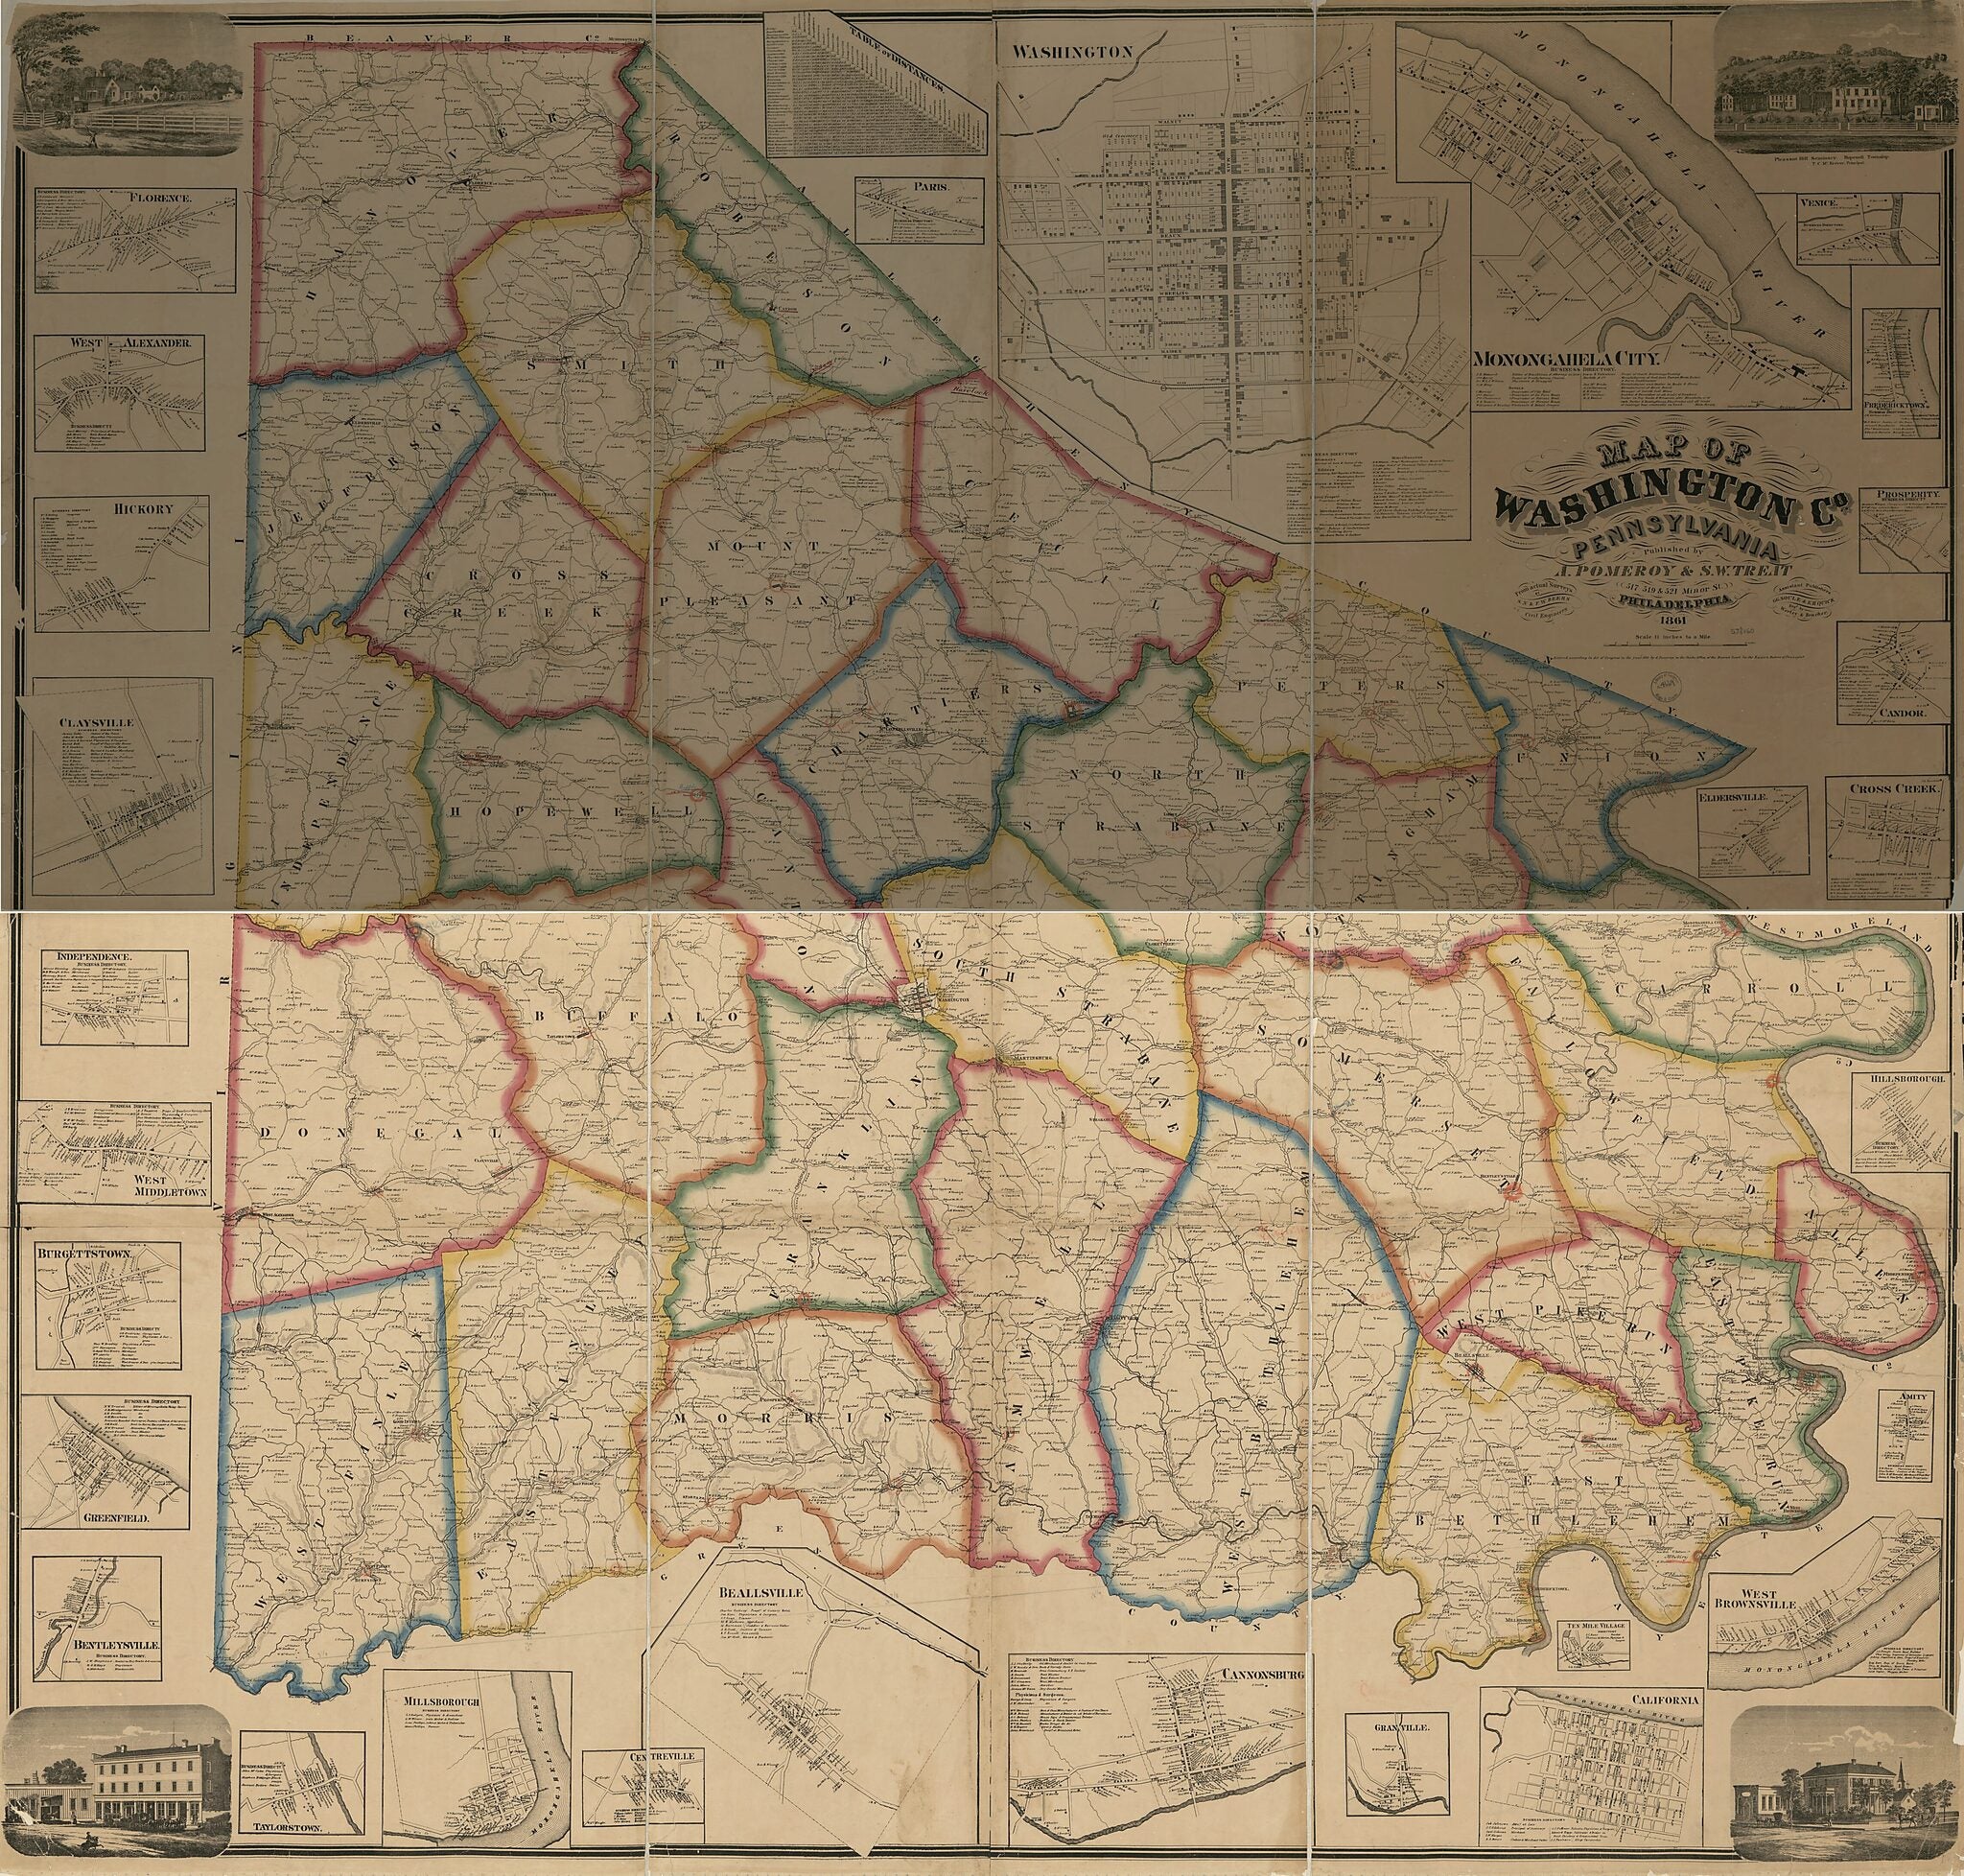 This old map of Map of Washington County, Pennsylvania : from Actual Surveys from 1861 was created by  A. Pomeroy &amp; S.W. Treat, F. W. (Frederick W.) Beers, S. N. Beers,  G.G. Soule &amp; E.H. Quick,  Worley &amp; Bracher in 1861